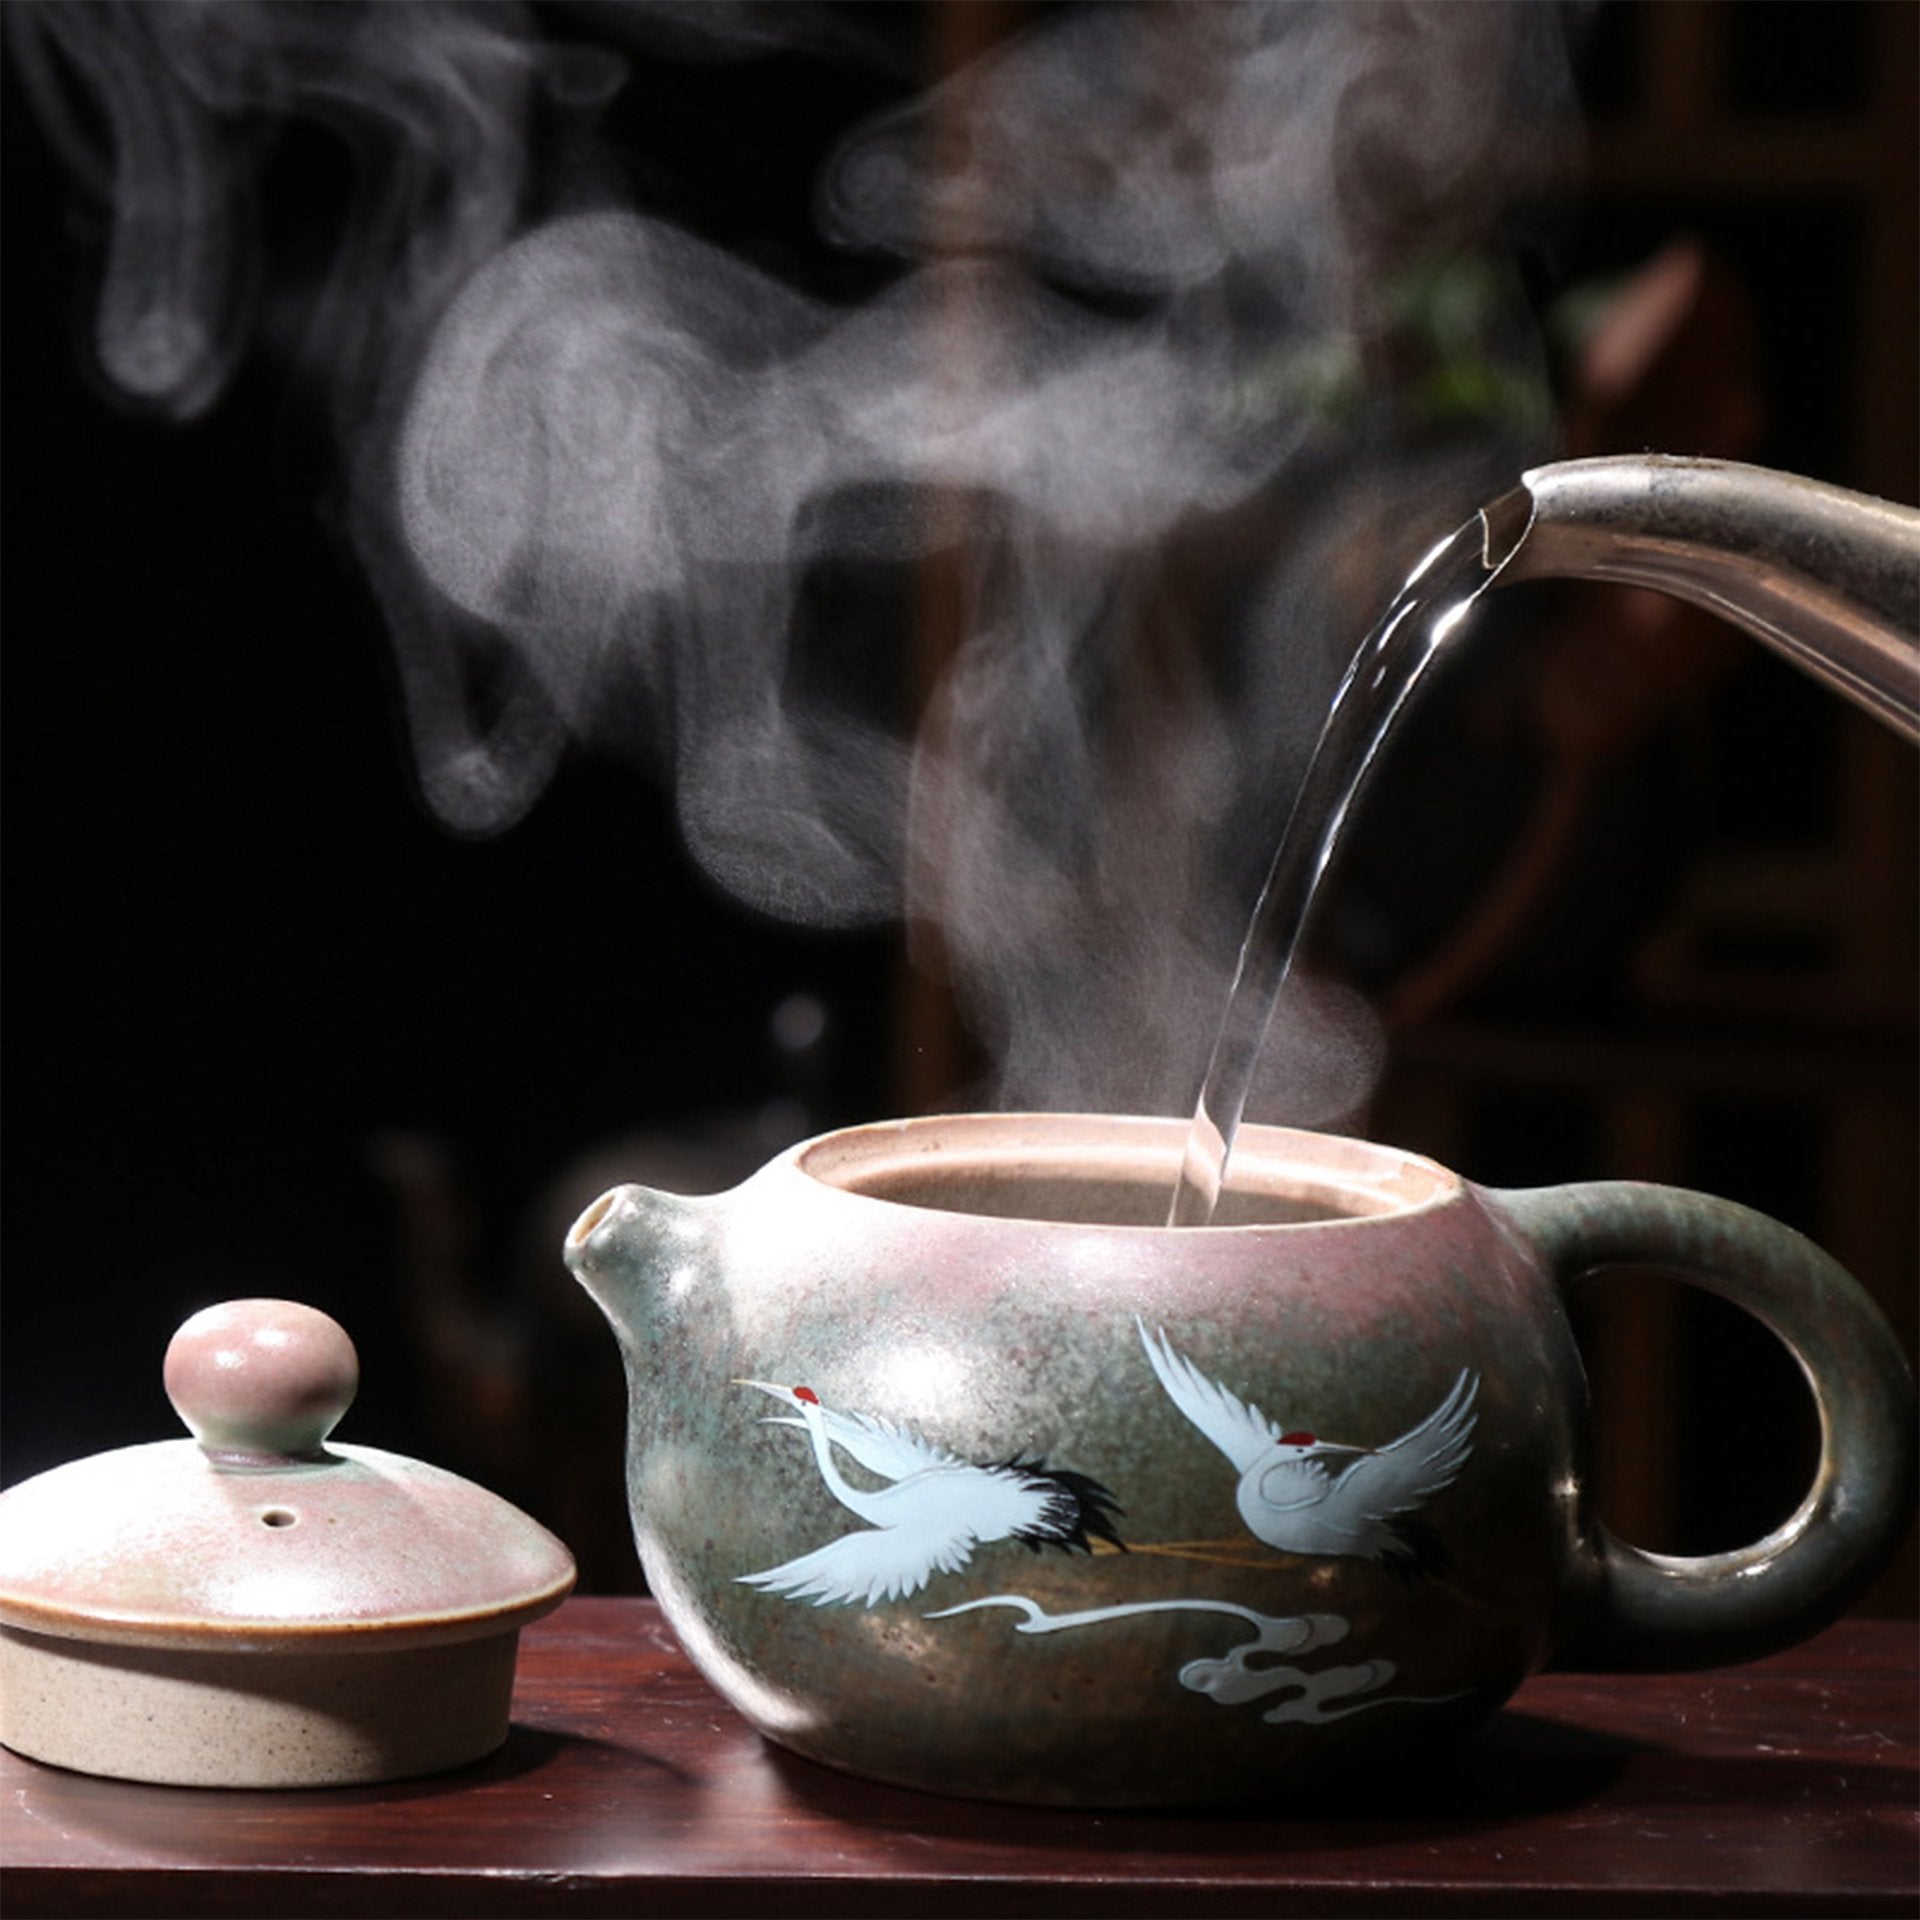 Steaming painted teapot with crane designs being filled with water